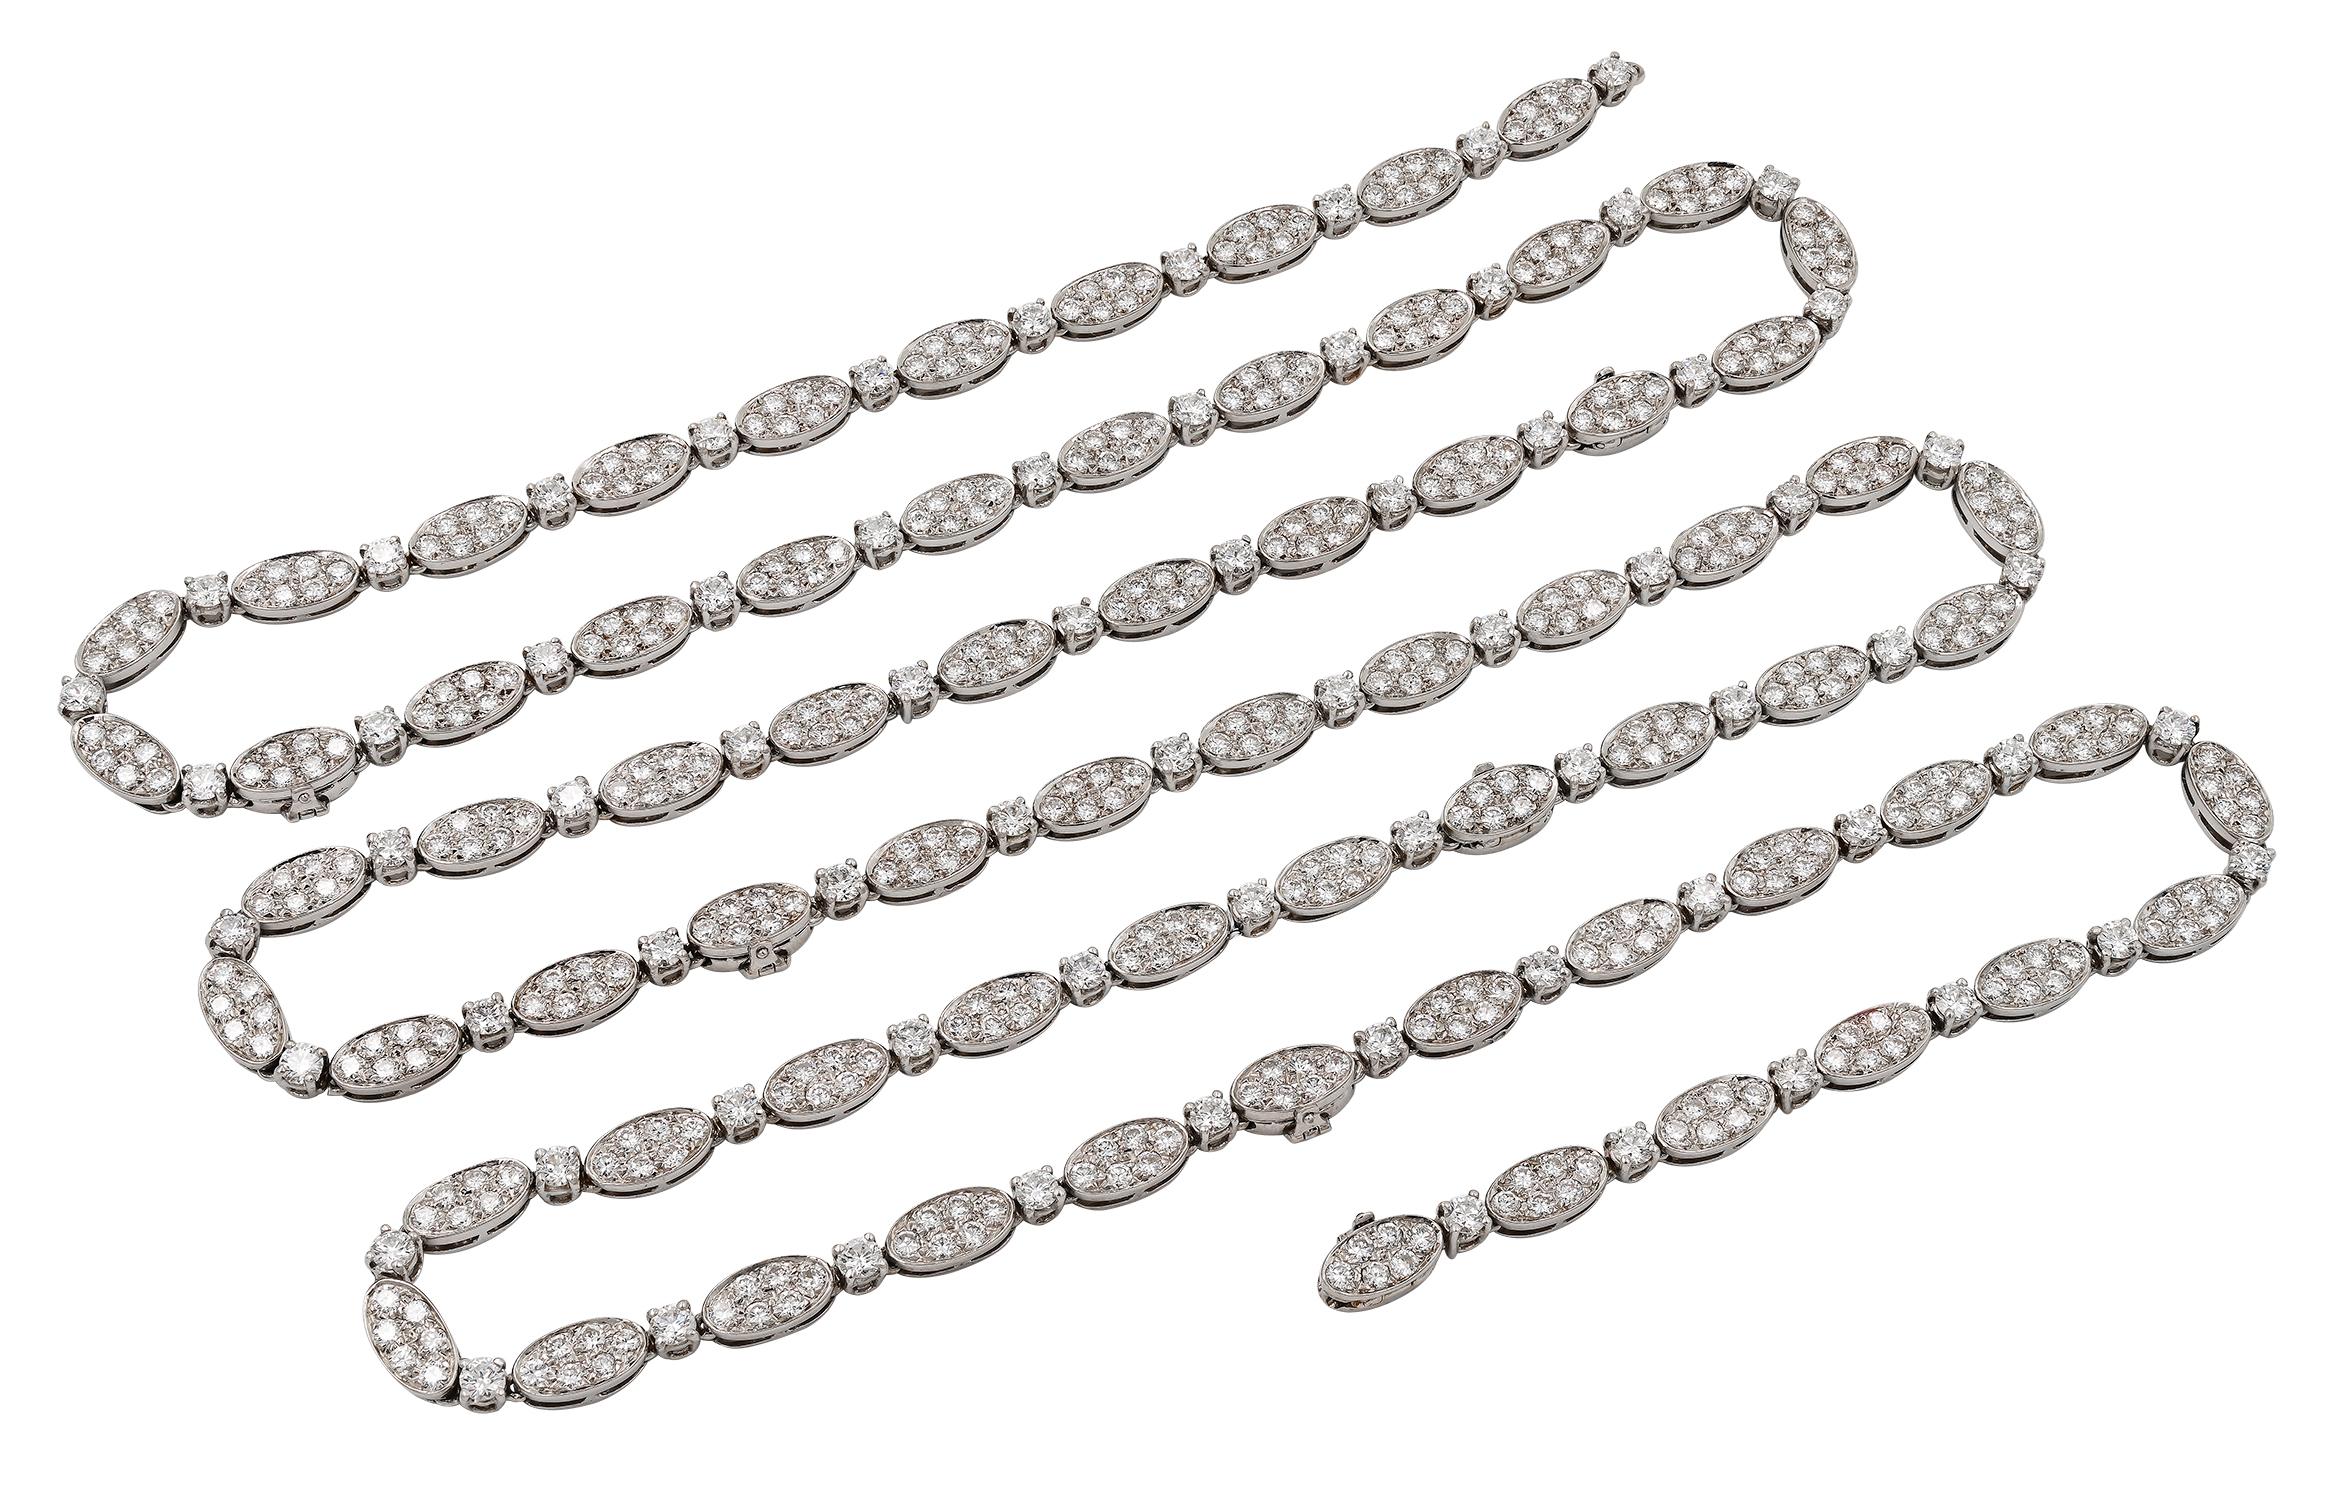 VAN CLEEF NECKLACE.

A magnificent example of elegance and sophistication from the renowned Paris Jewler Van Cleef and Arpels .

This opera length necklace is intricately set with approximately 30 carats of ideal cut round colorless diamonds.
The